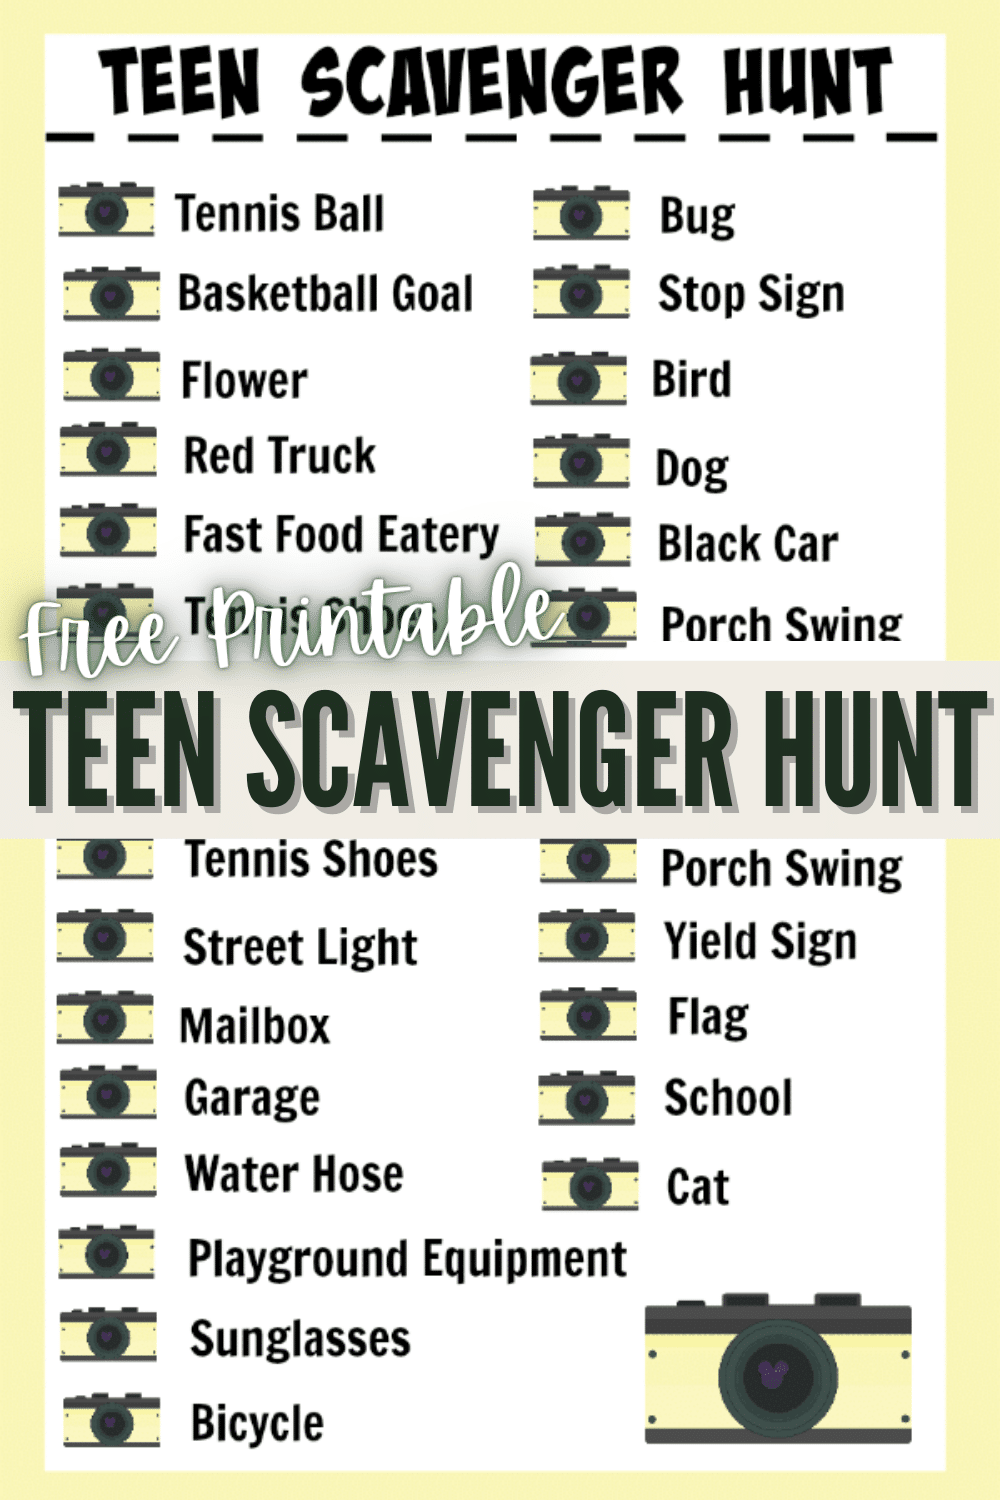 A teen scavenger hunt is a great activity to keep teens busy and having fun. This printable scavenger hunt makes it quick and easy to organize. #printables #scavengerhunt #activitiesforteens via @wondermomwannab